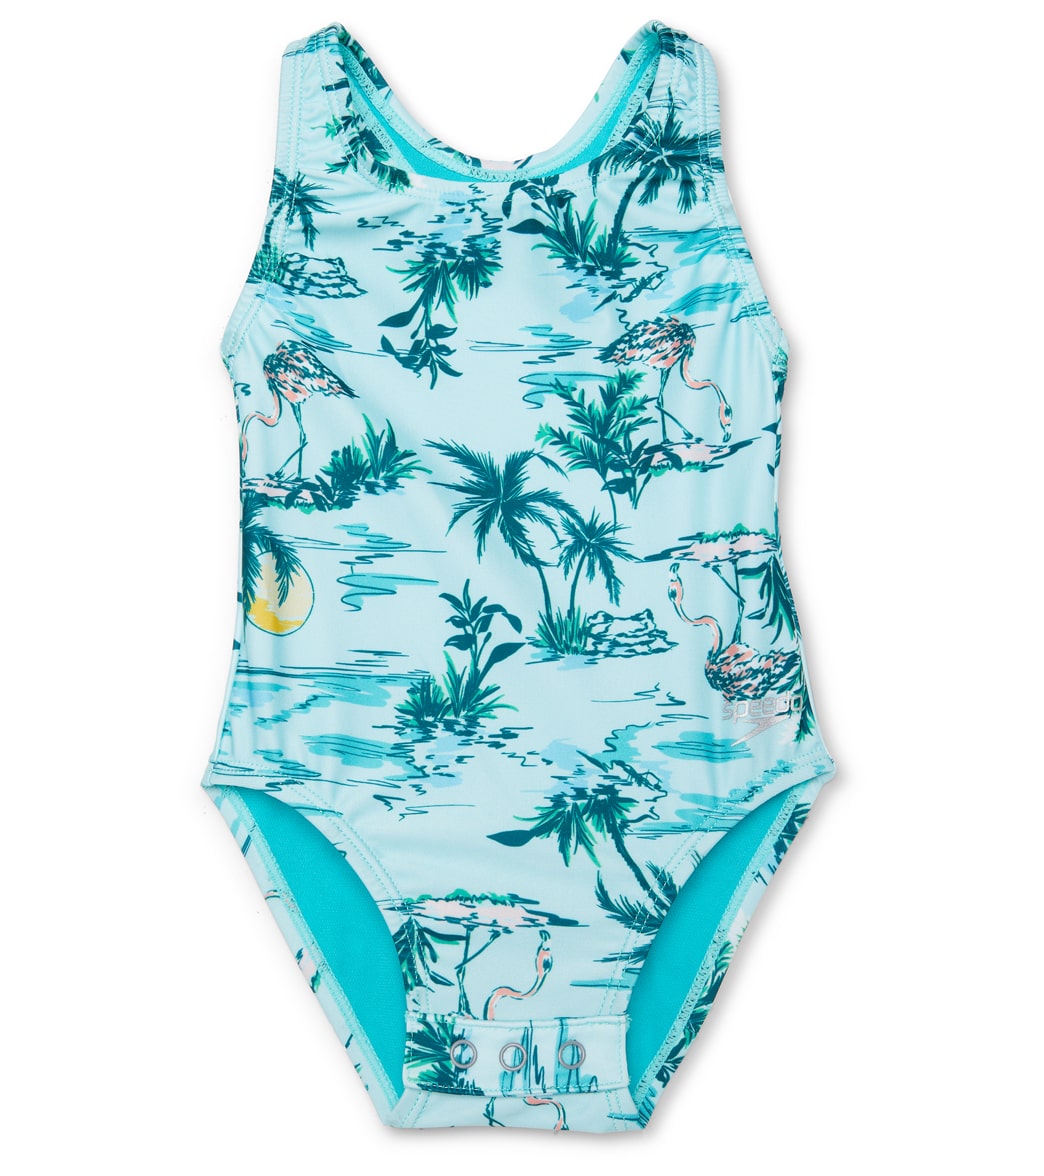 Speedo Girls Printed Snap One Piece Swimsuit Baby Toddler At Swimoutlet Com